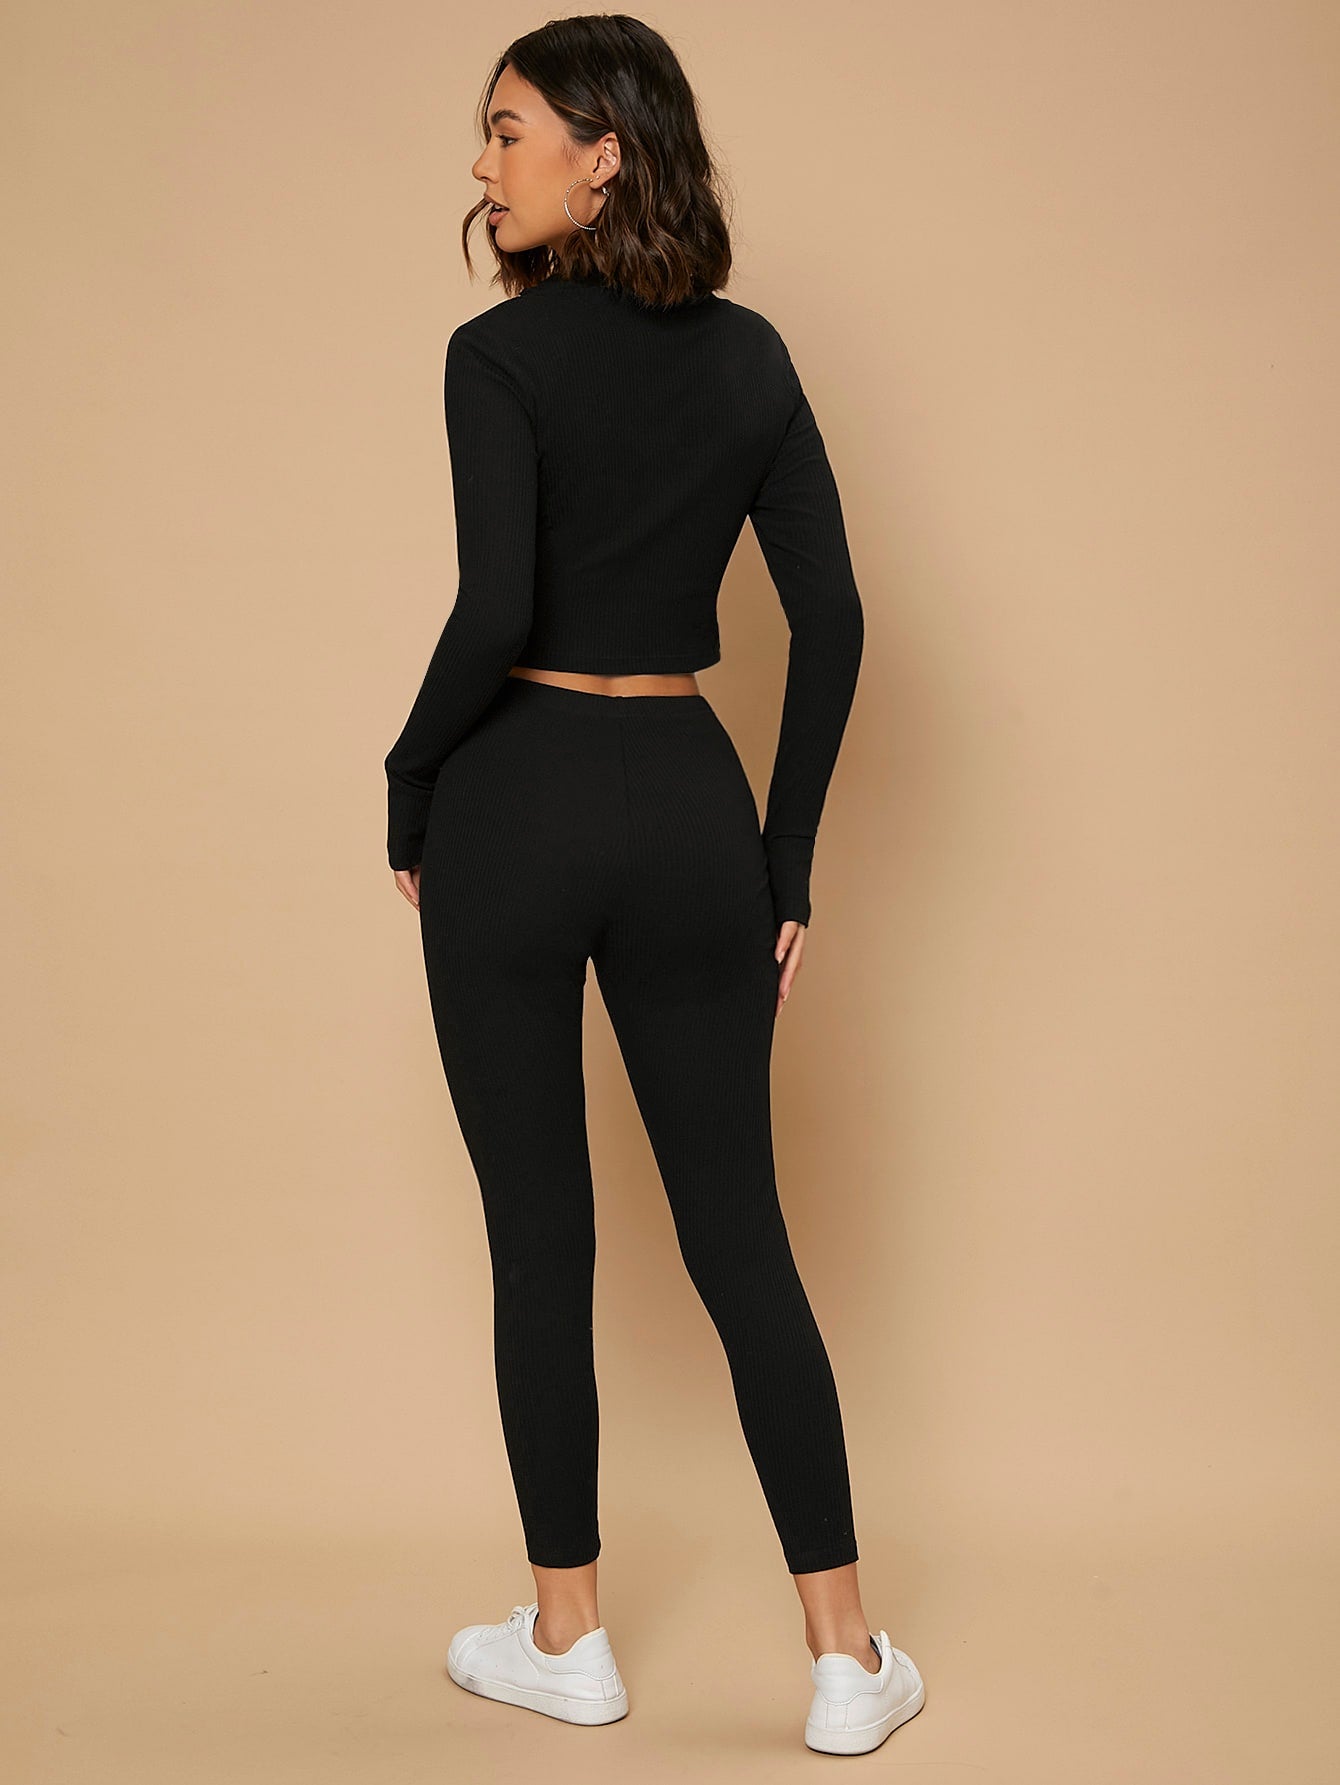 Black Cut Out Front Solid Leggings –